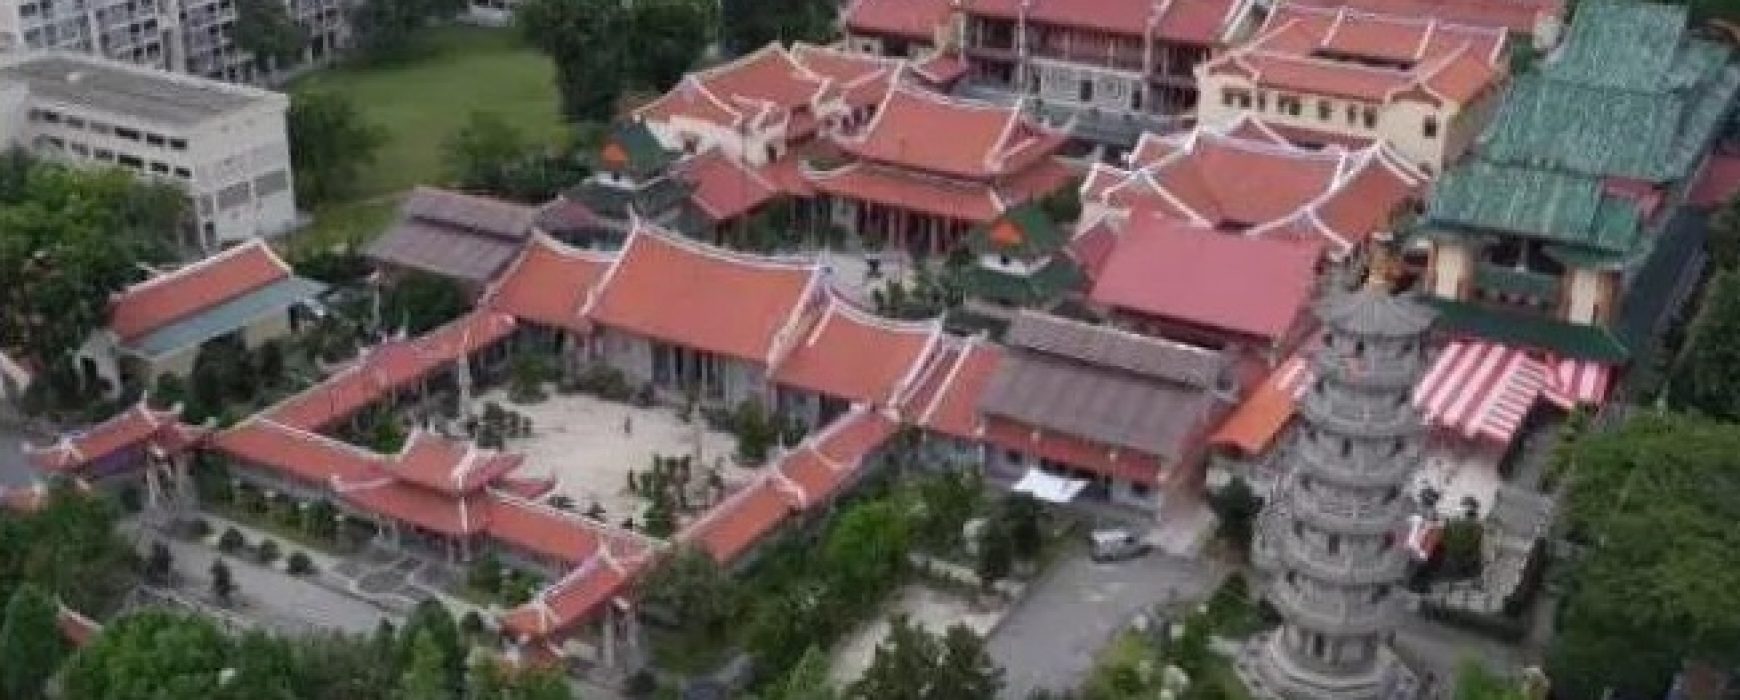 Call for Papers-International Conference on “Chinese Buddhist Monastery & Social Spaces in Asia”